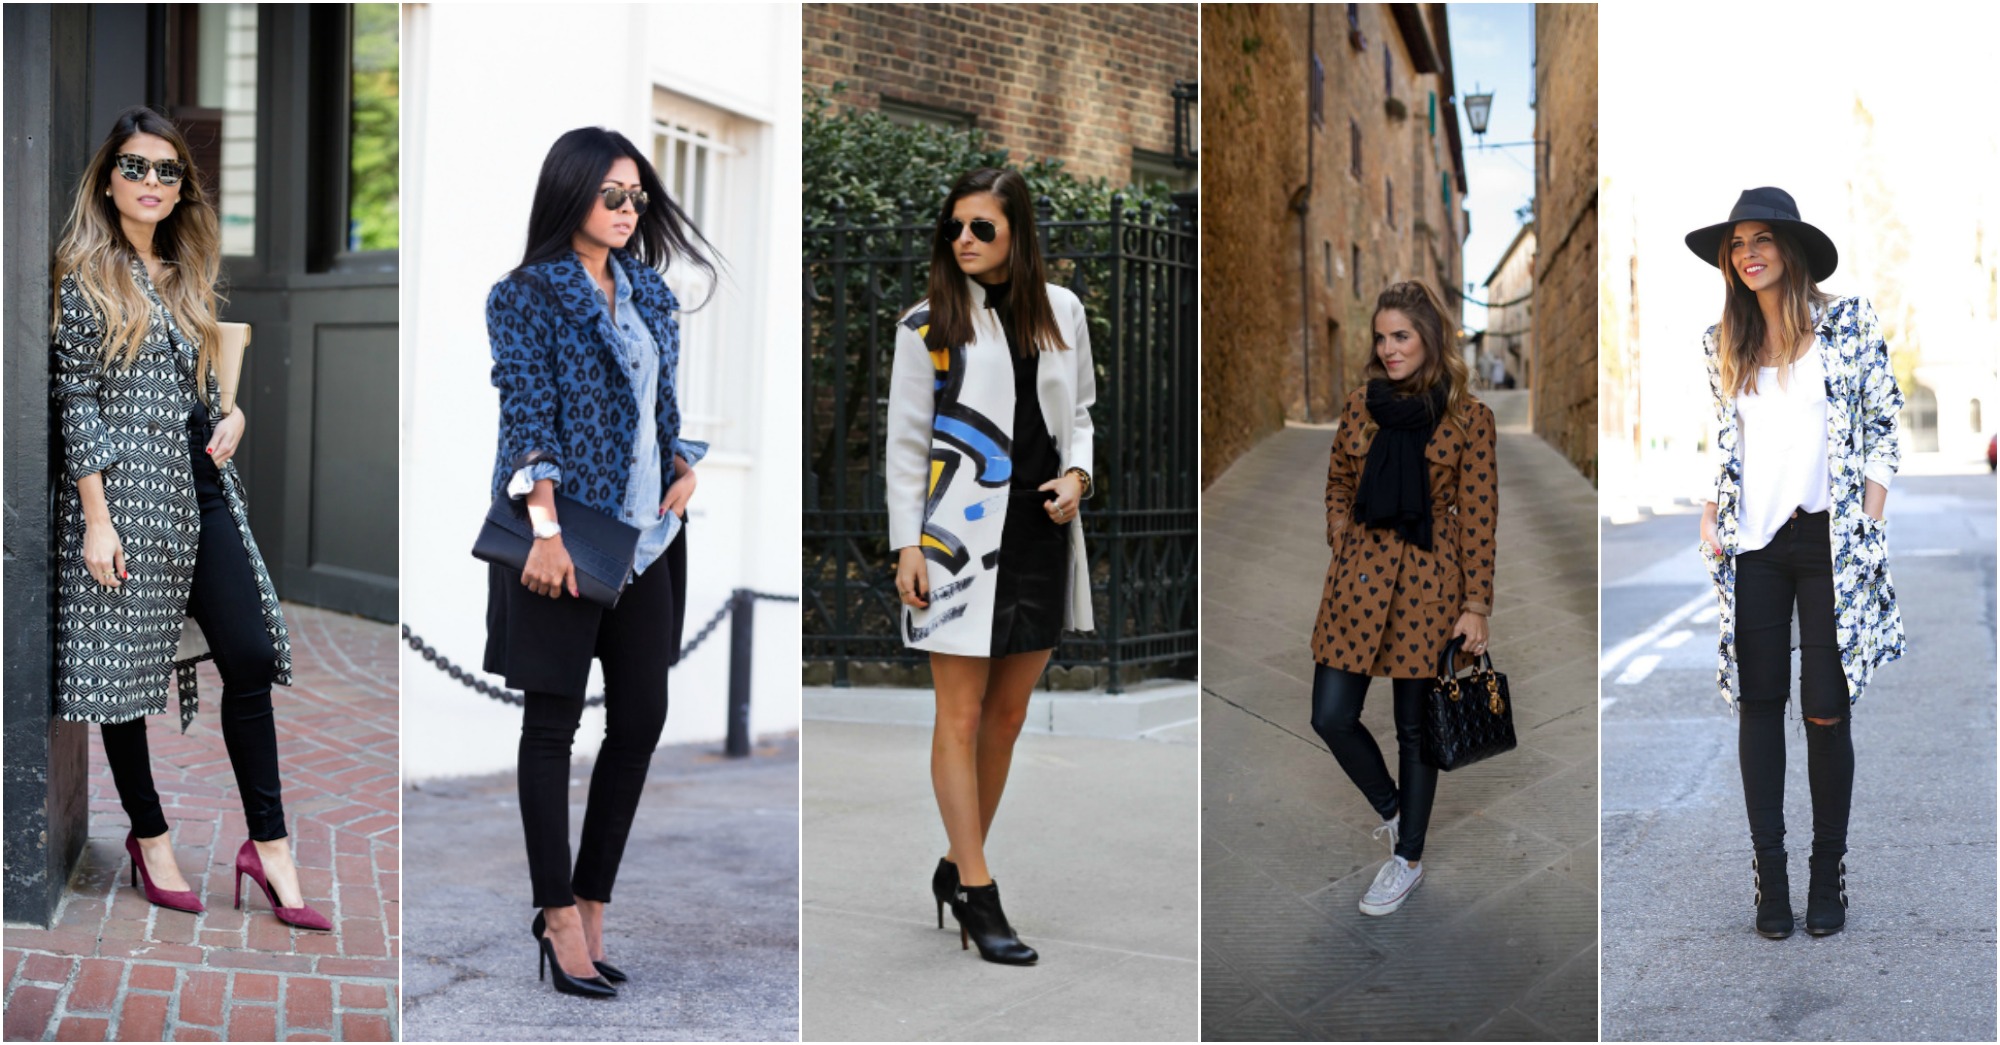 How To Make A Statement With Printed Trench Coat - fashionsy.com